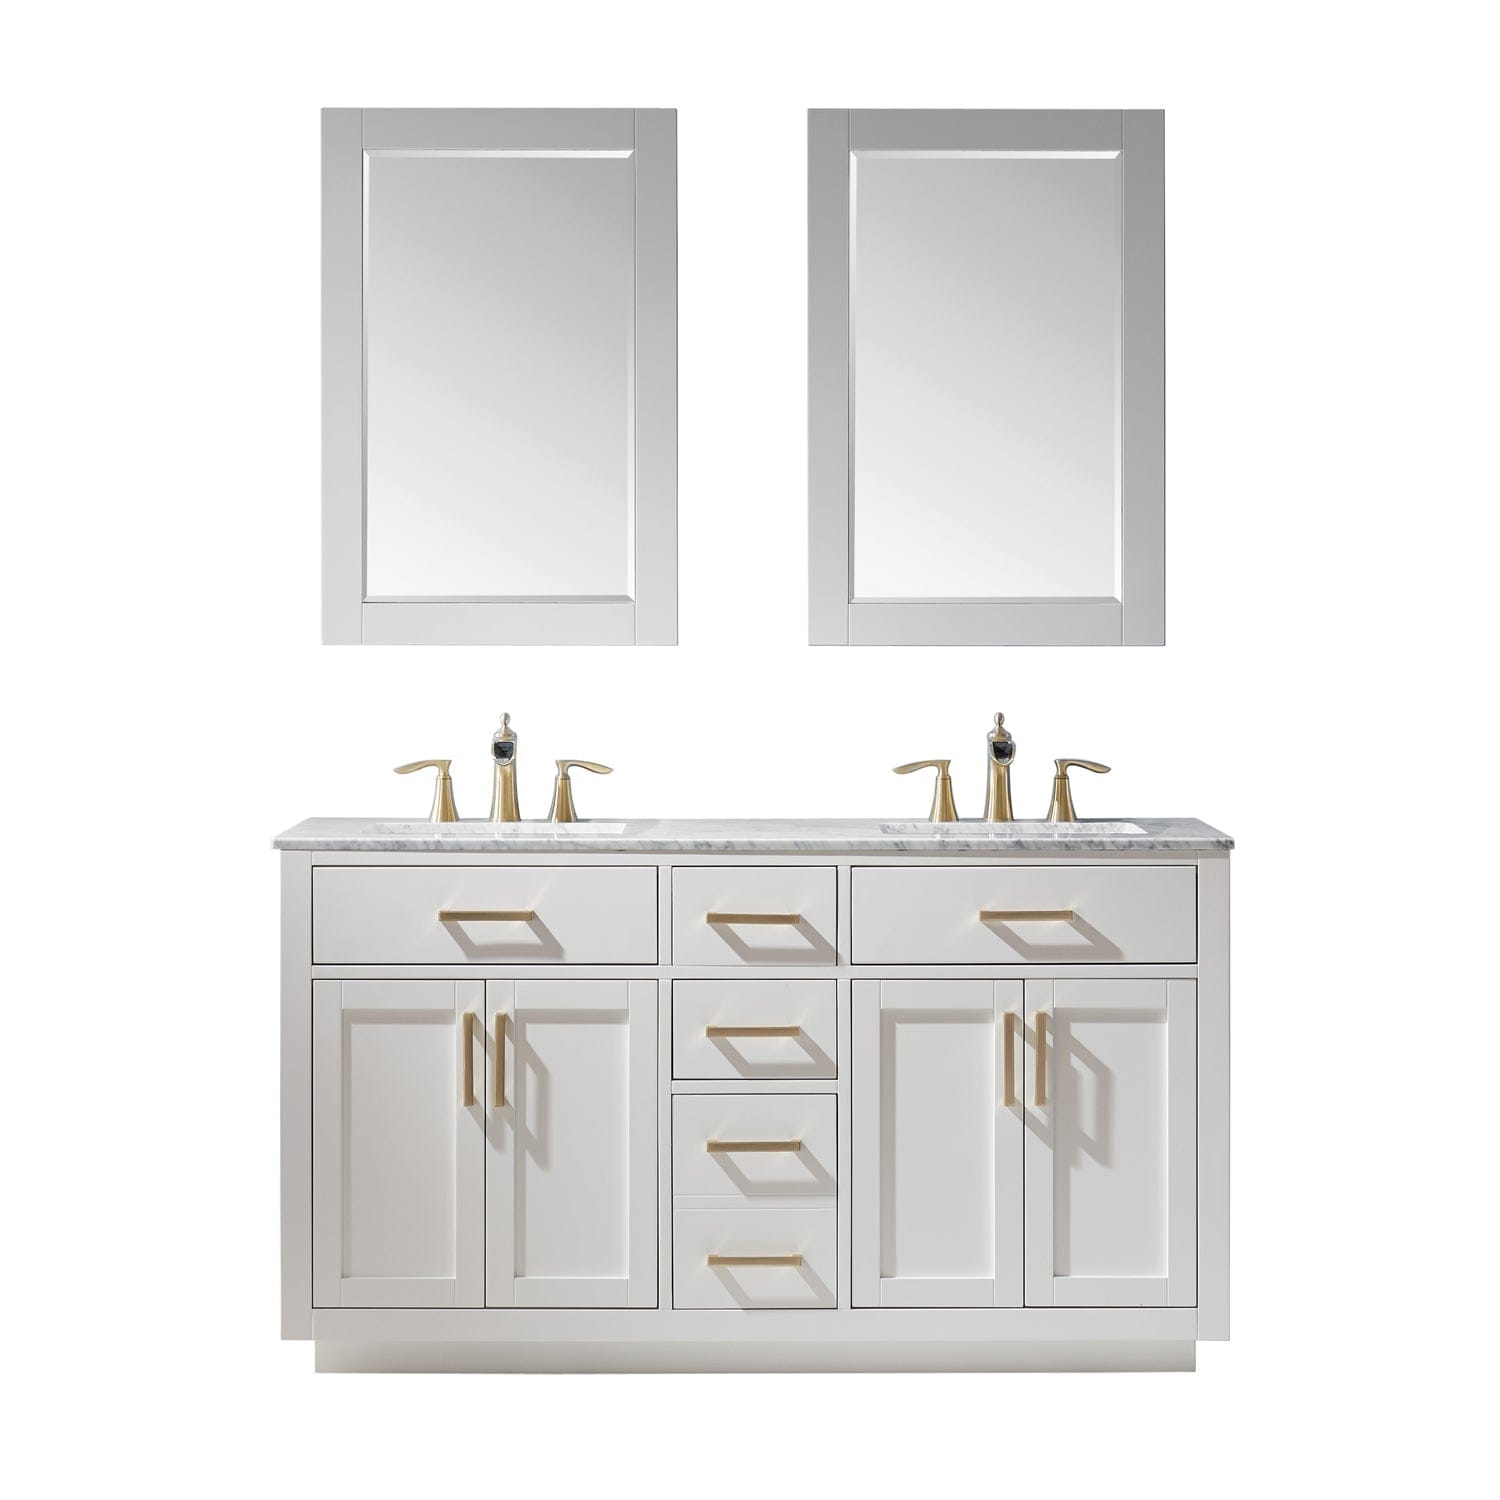 Altair Ivy 60" Double Bathroom Vanity Set in White and Carrara White Marble Countertop with Mirror 531060-WH-CA - Molaix631112971256Vanity531060-WH-CA